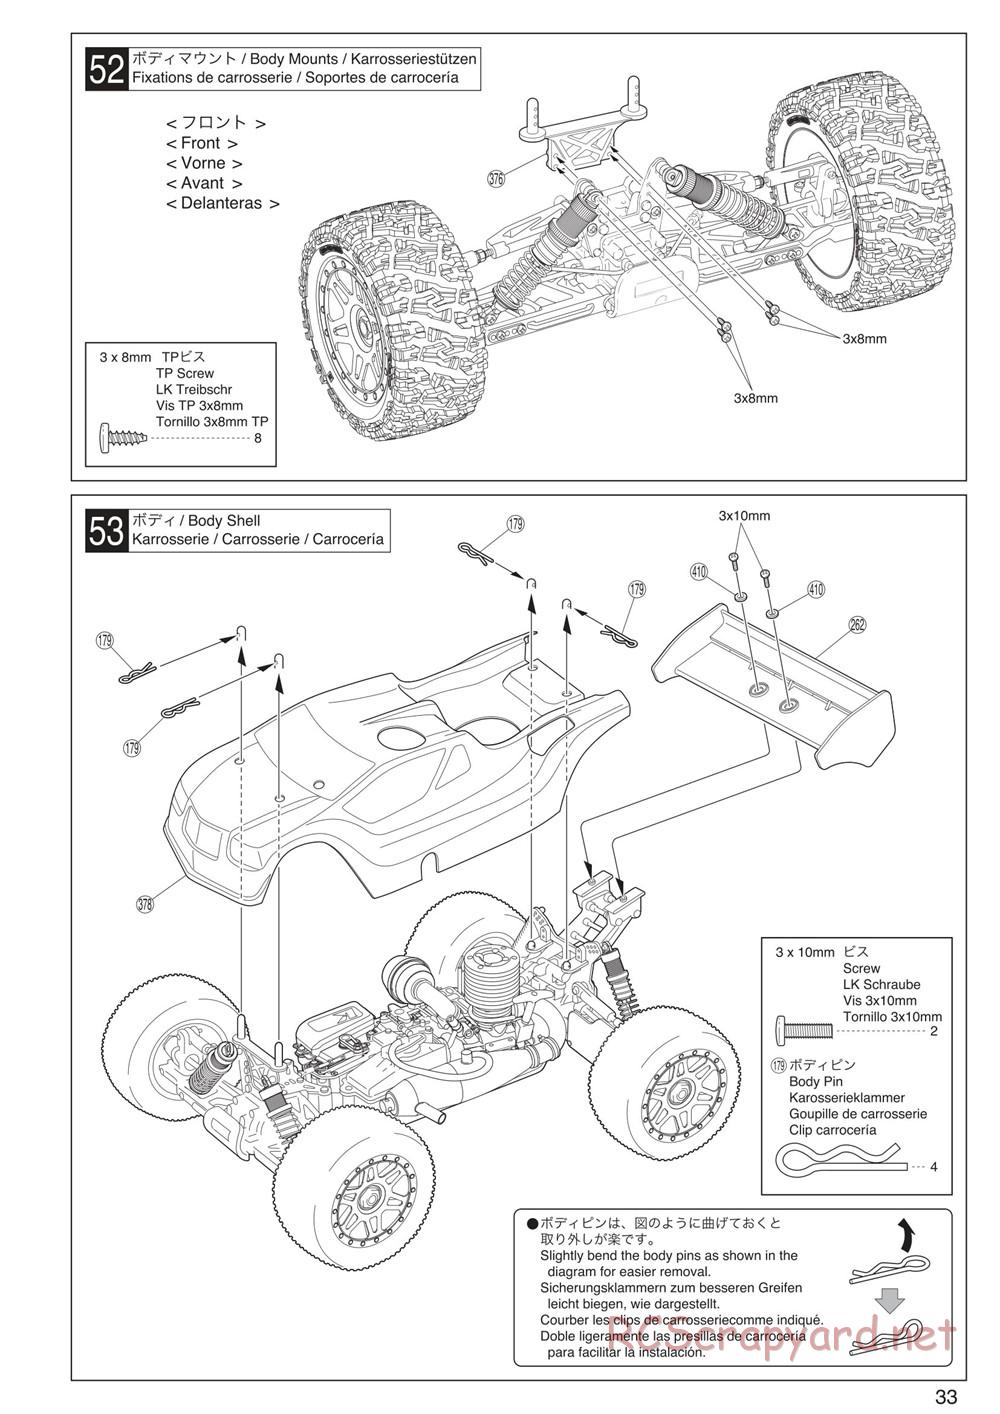 Kyosho - Inferno Neo ST 3.0 - Manual - Page 33